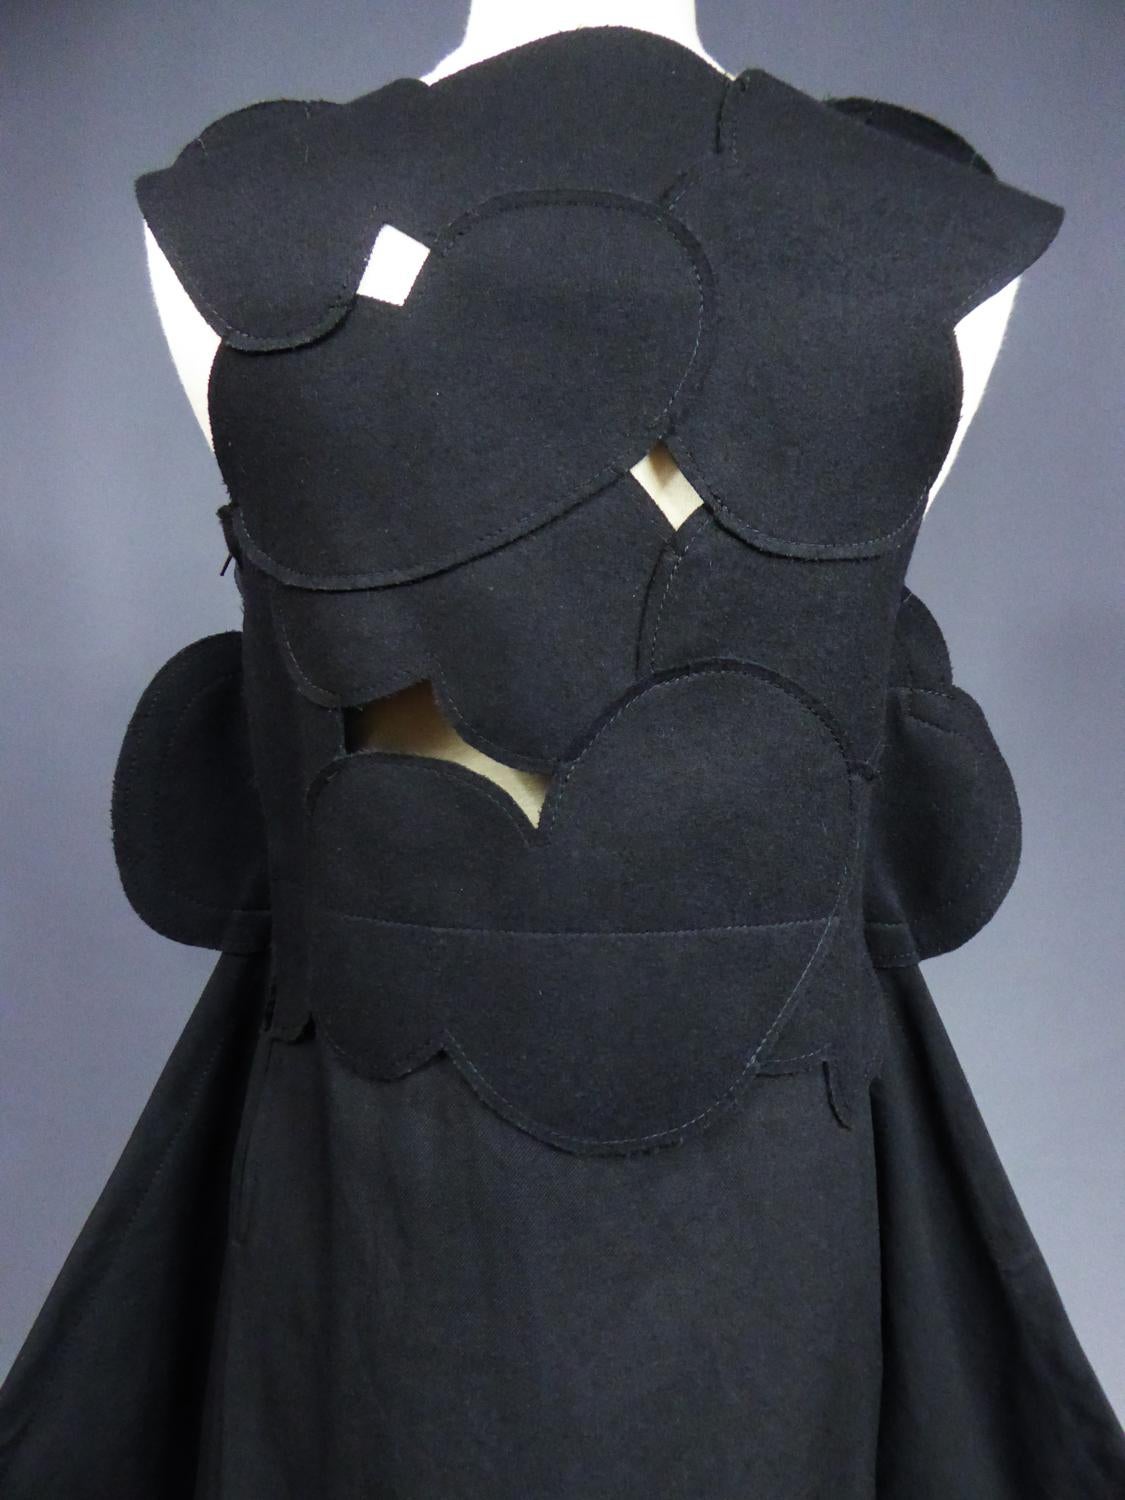 A Comme des Garcons Junya Watanabe Black Woollen Chasuble Dress Circa 2000 For Sale 9